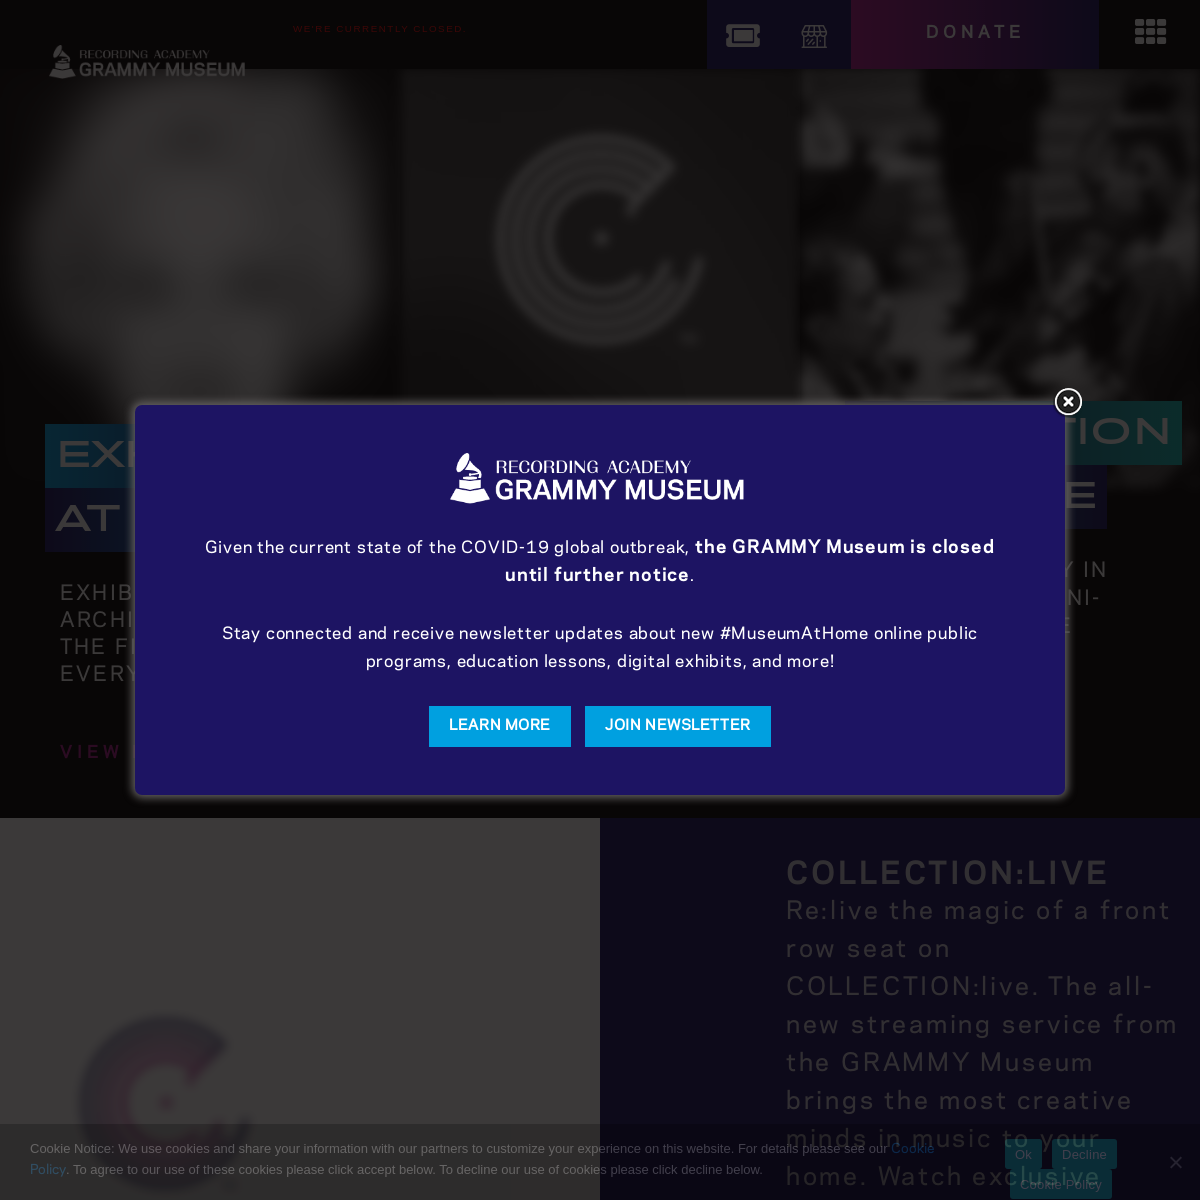 A complete backup of grammymuseum.org